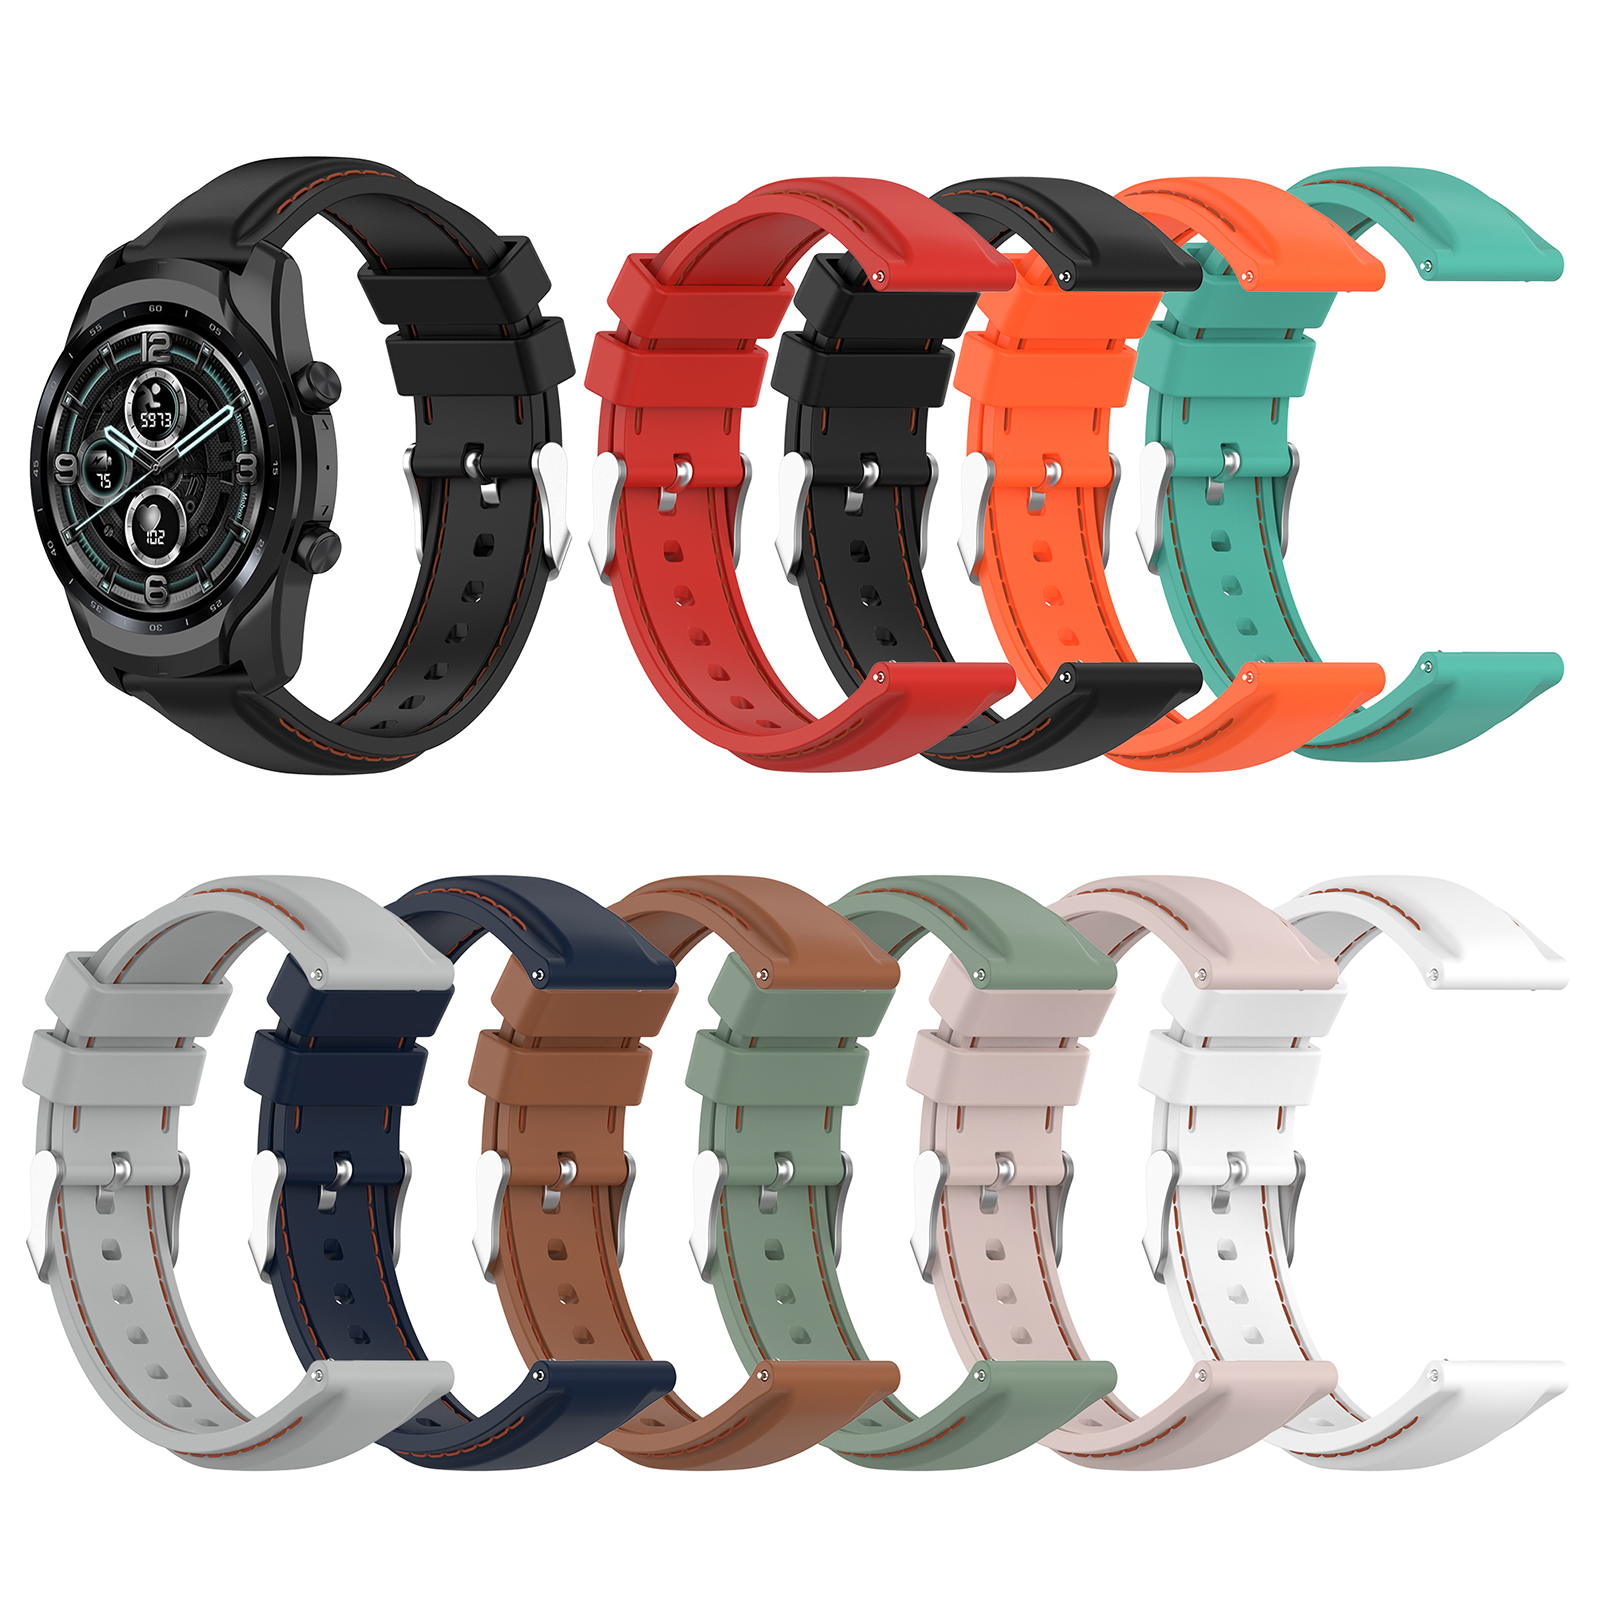 22mm-Soft-Silicone-Watch-Strap-Band-Replacement-Sport-Bracelet-Watchband-For-Ticwatch-Pro3LTE-Haylou-1809083-2